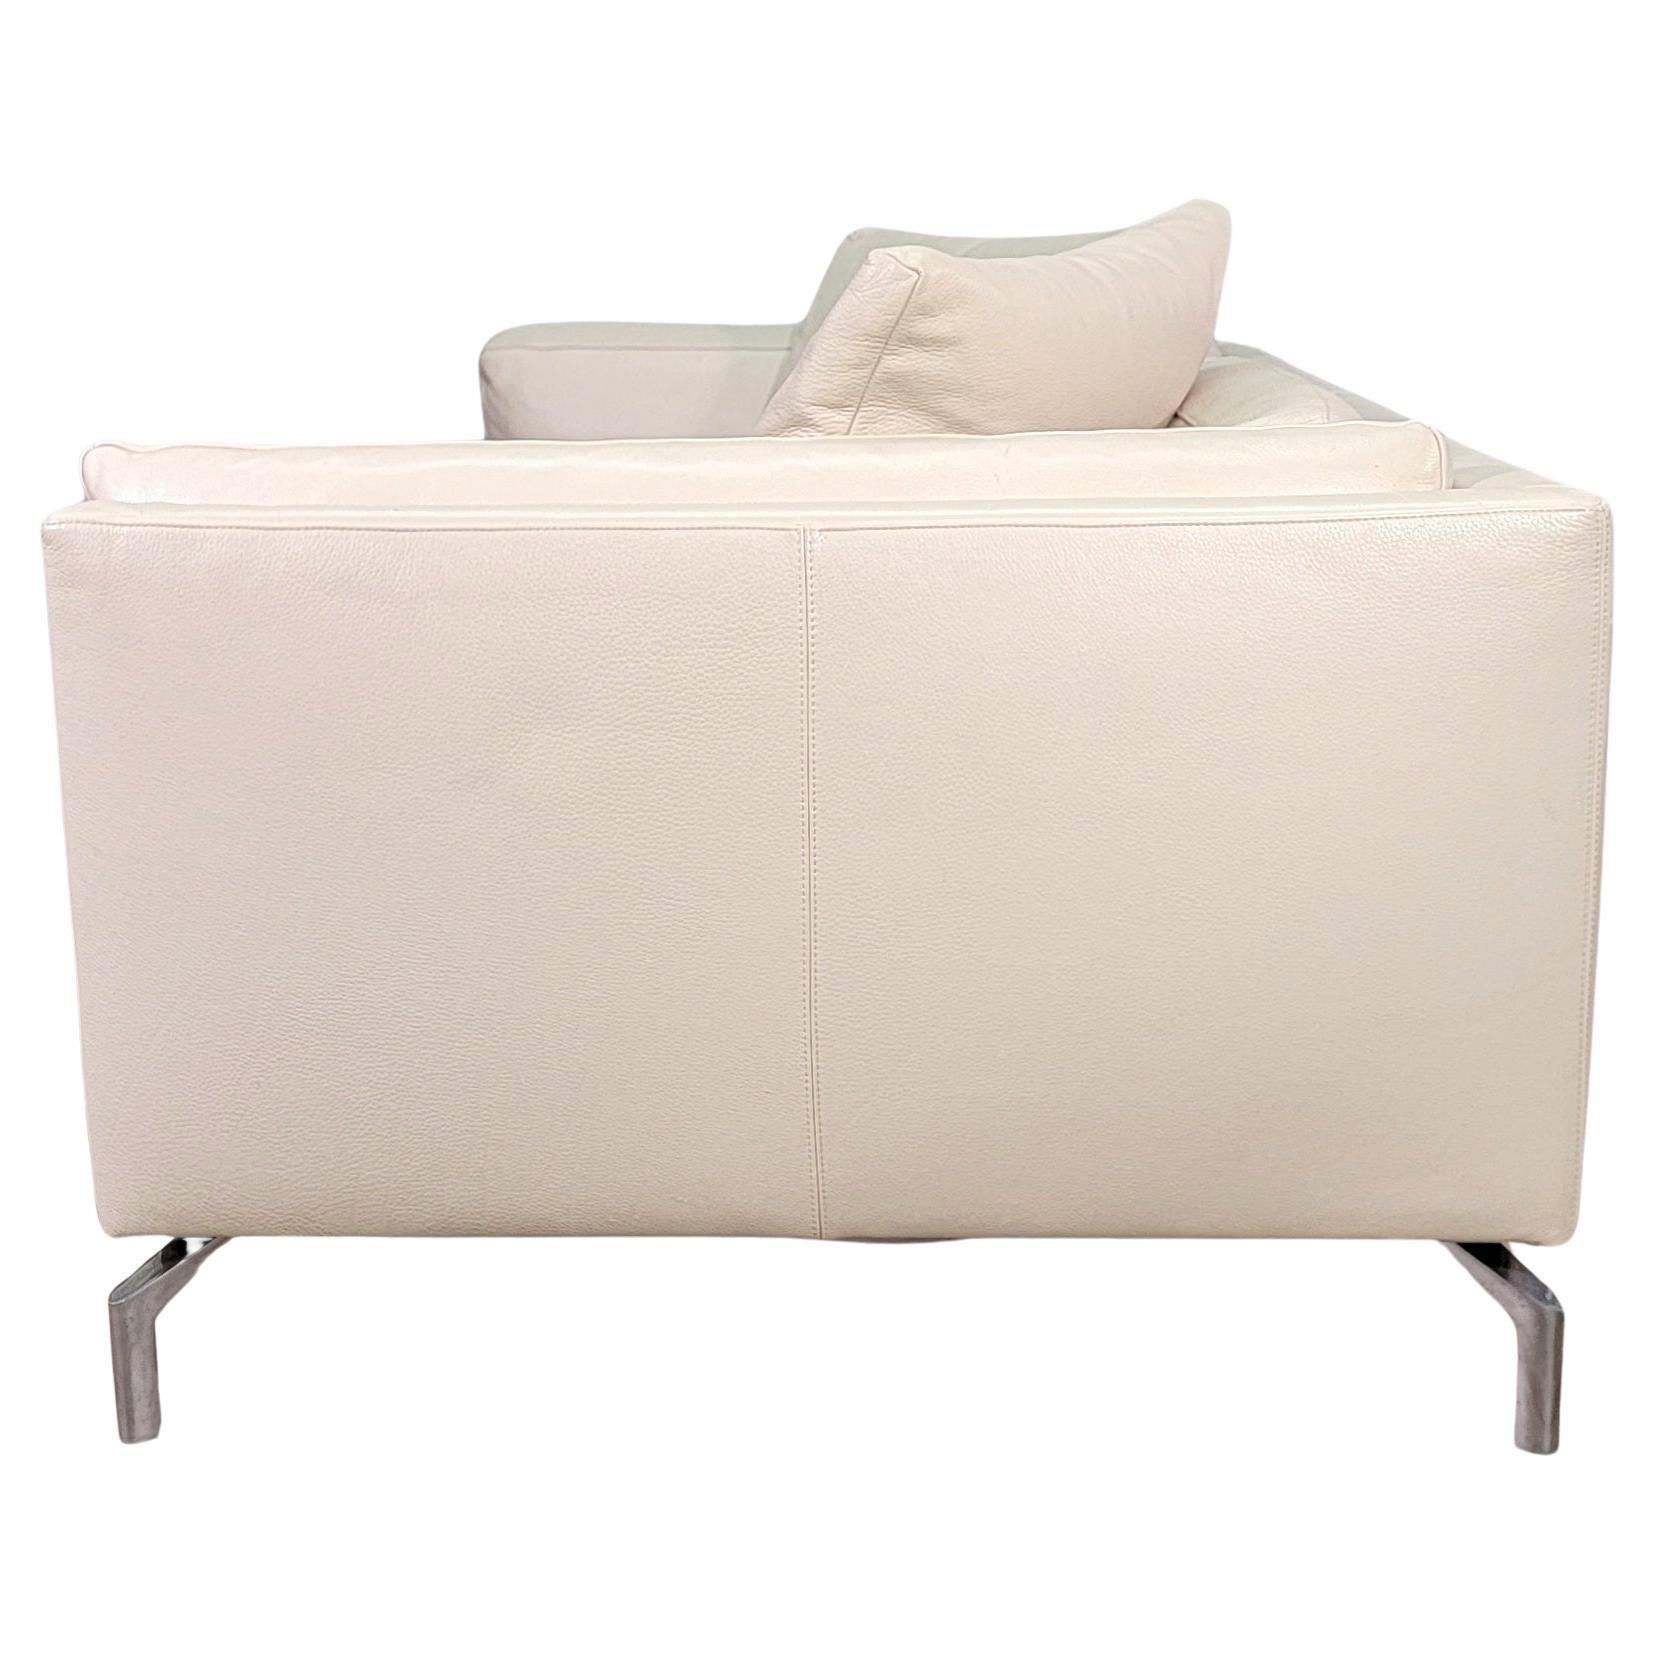 Ivory off-white leather sofa designed by Giorgio Soressi for Design Within Reach (aka DWR). Elegant and comfortable, this creamy sofa is built with solid steel frame, polished cast-aluminum legs and features goose feather filling for plush support.